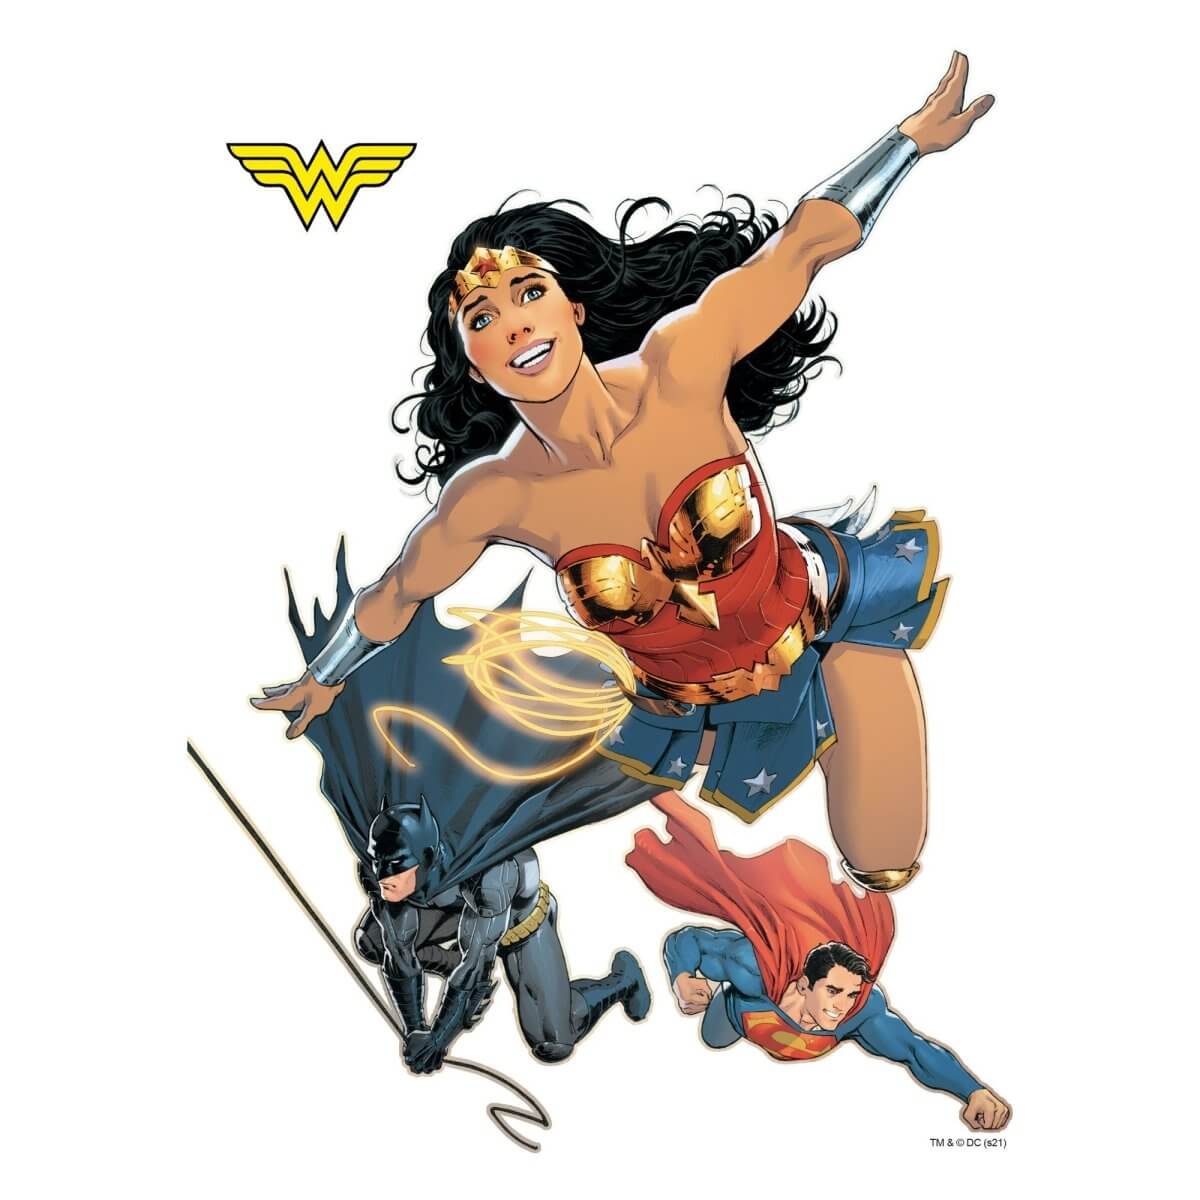 Kismet Decals Wonder Woman Annual #1 Comic Cover Series Officially Licensed Wall Sticker - Easy DIY DC Comics Home, Kids or Adult Bedroom, Office, Living Room Decor Wall Art - Kismet Decals